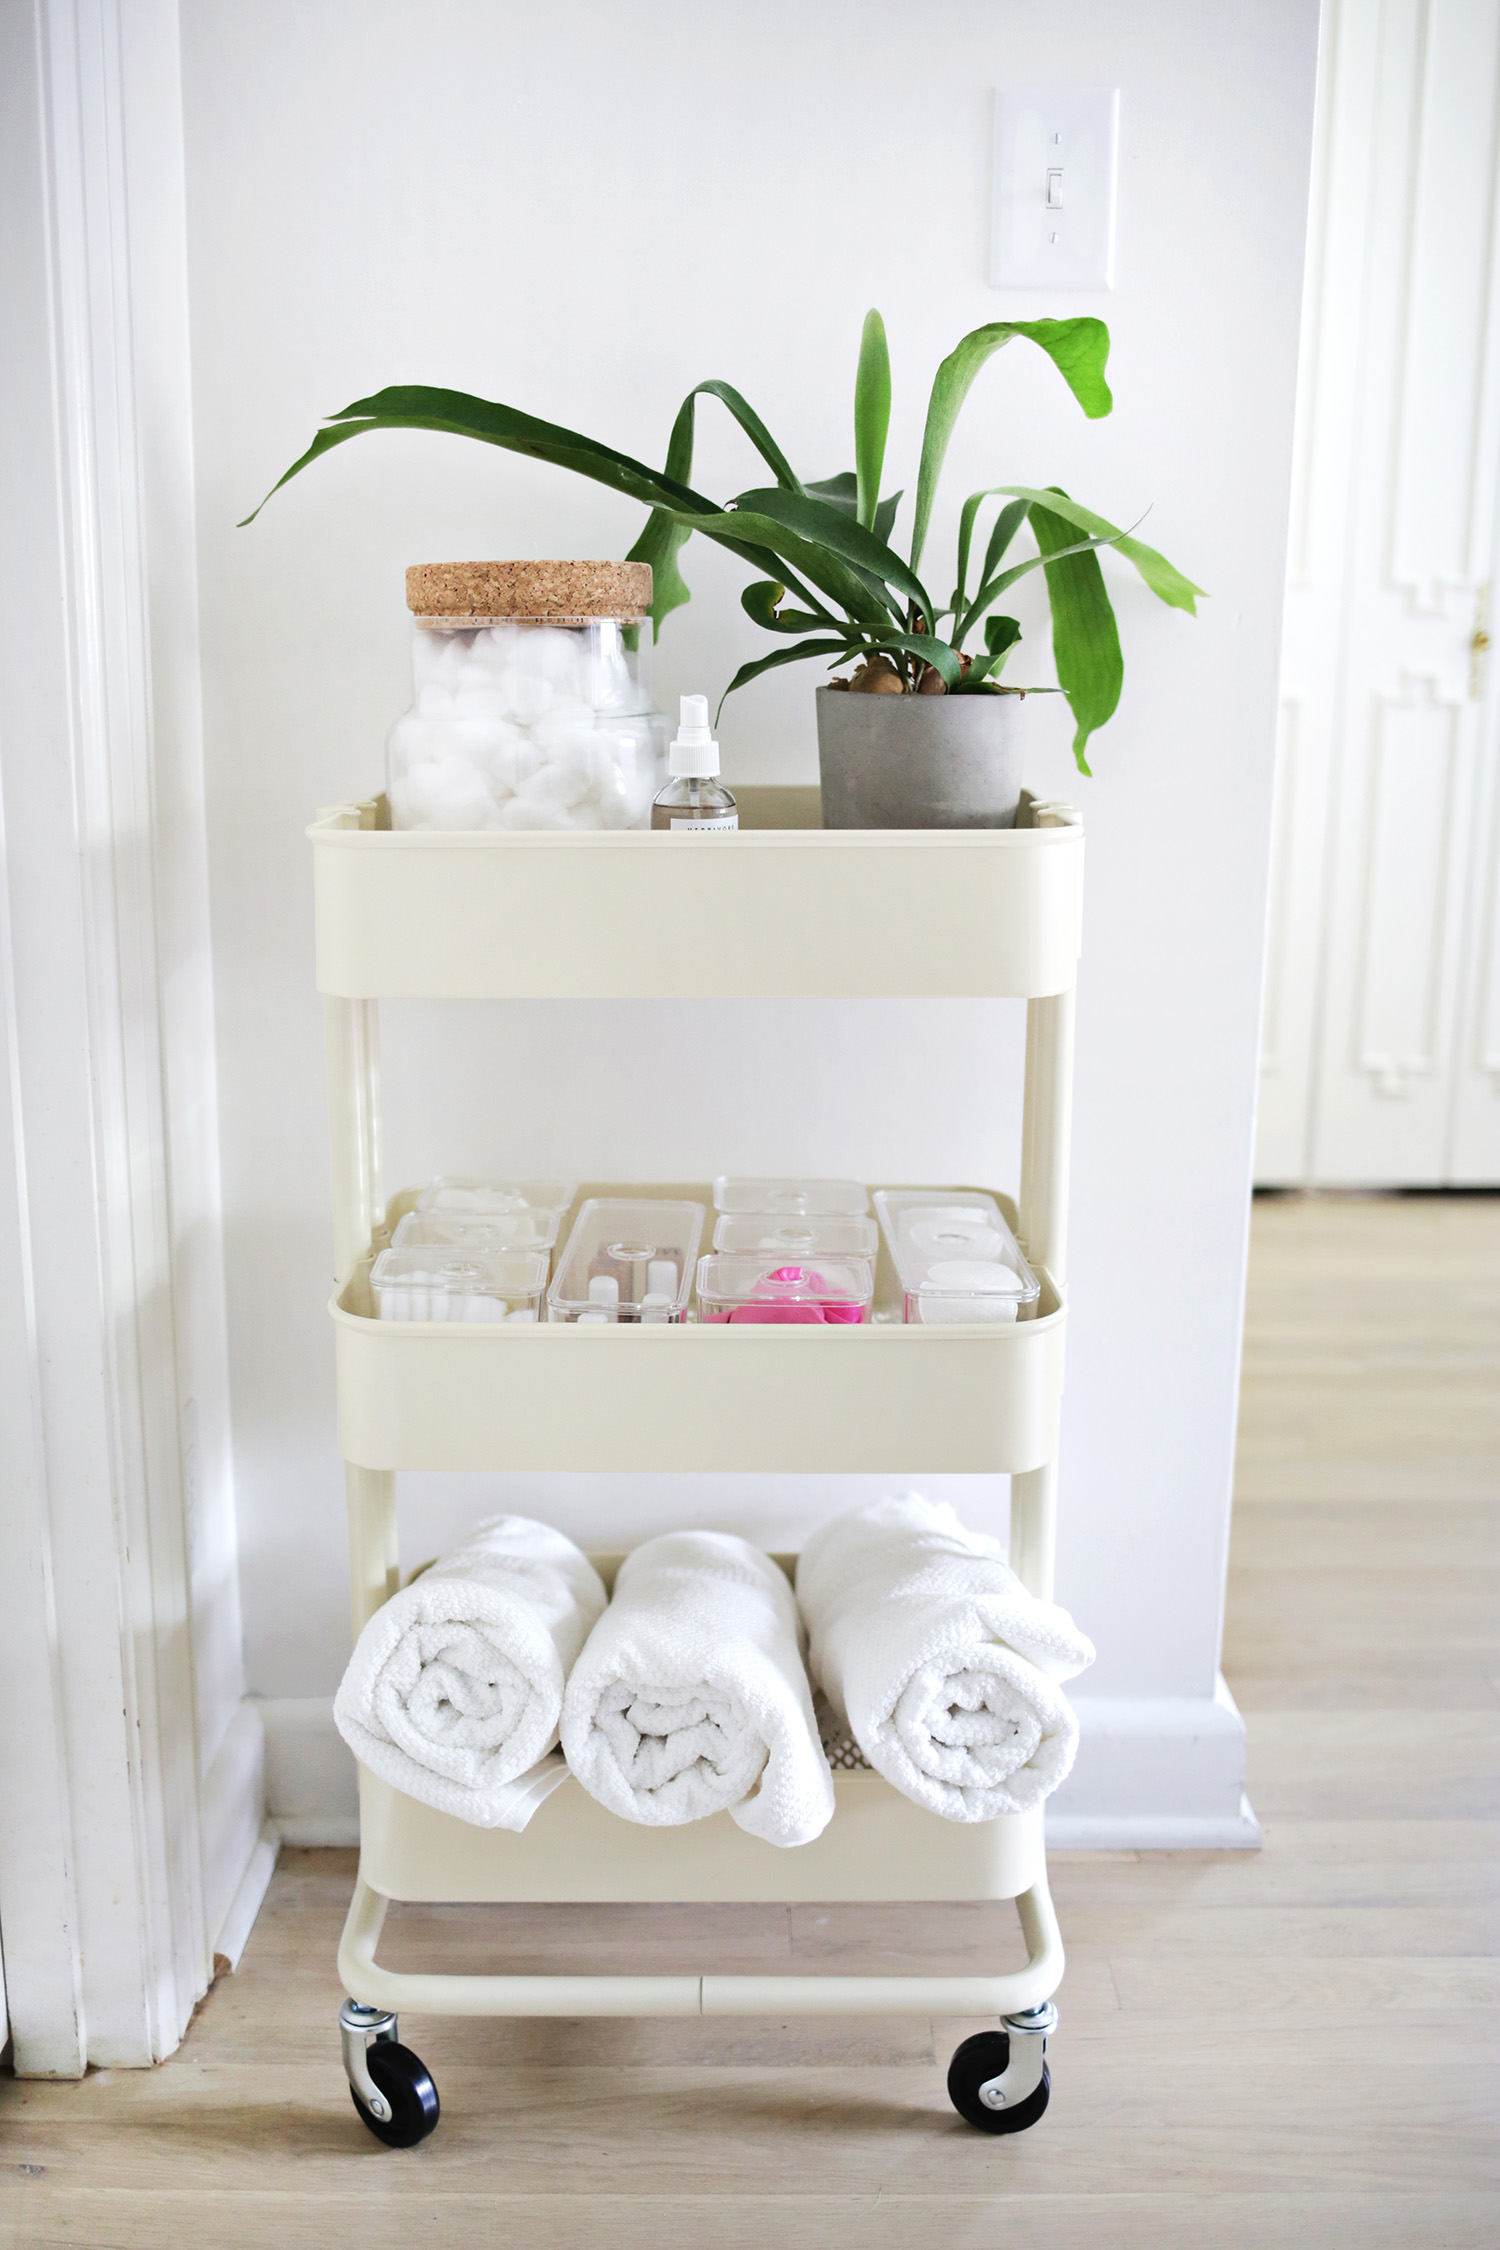 Organizing your bathroom supplies is easy!